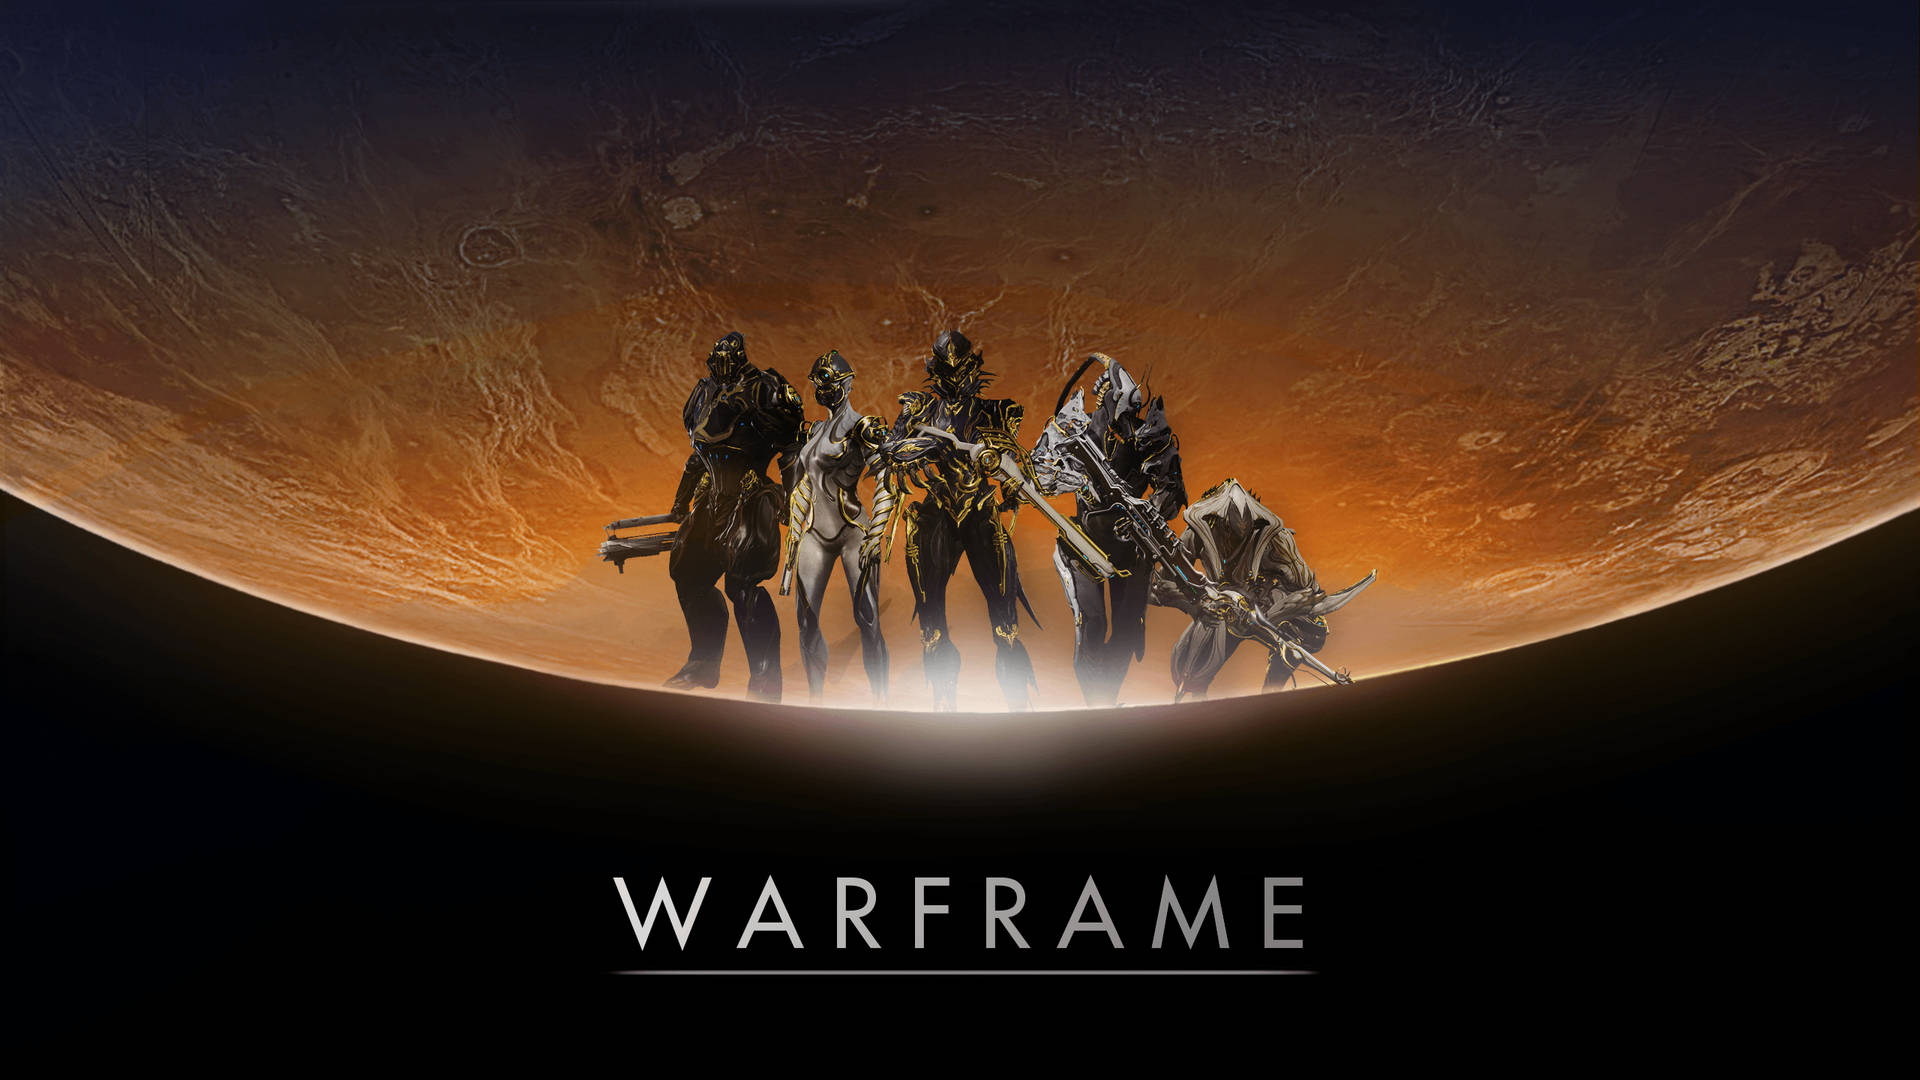 Noble Team join forces with Warframe in Halo Reach Wallpaper